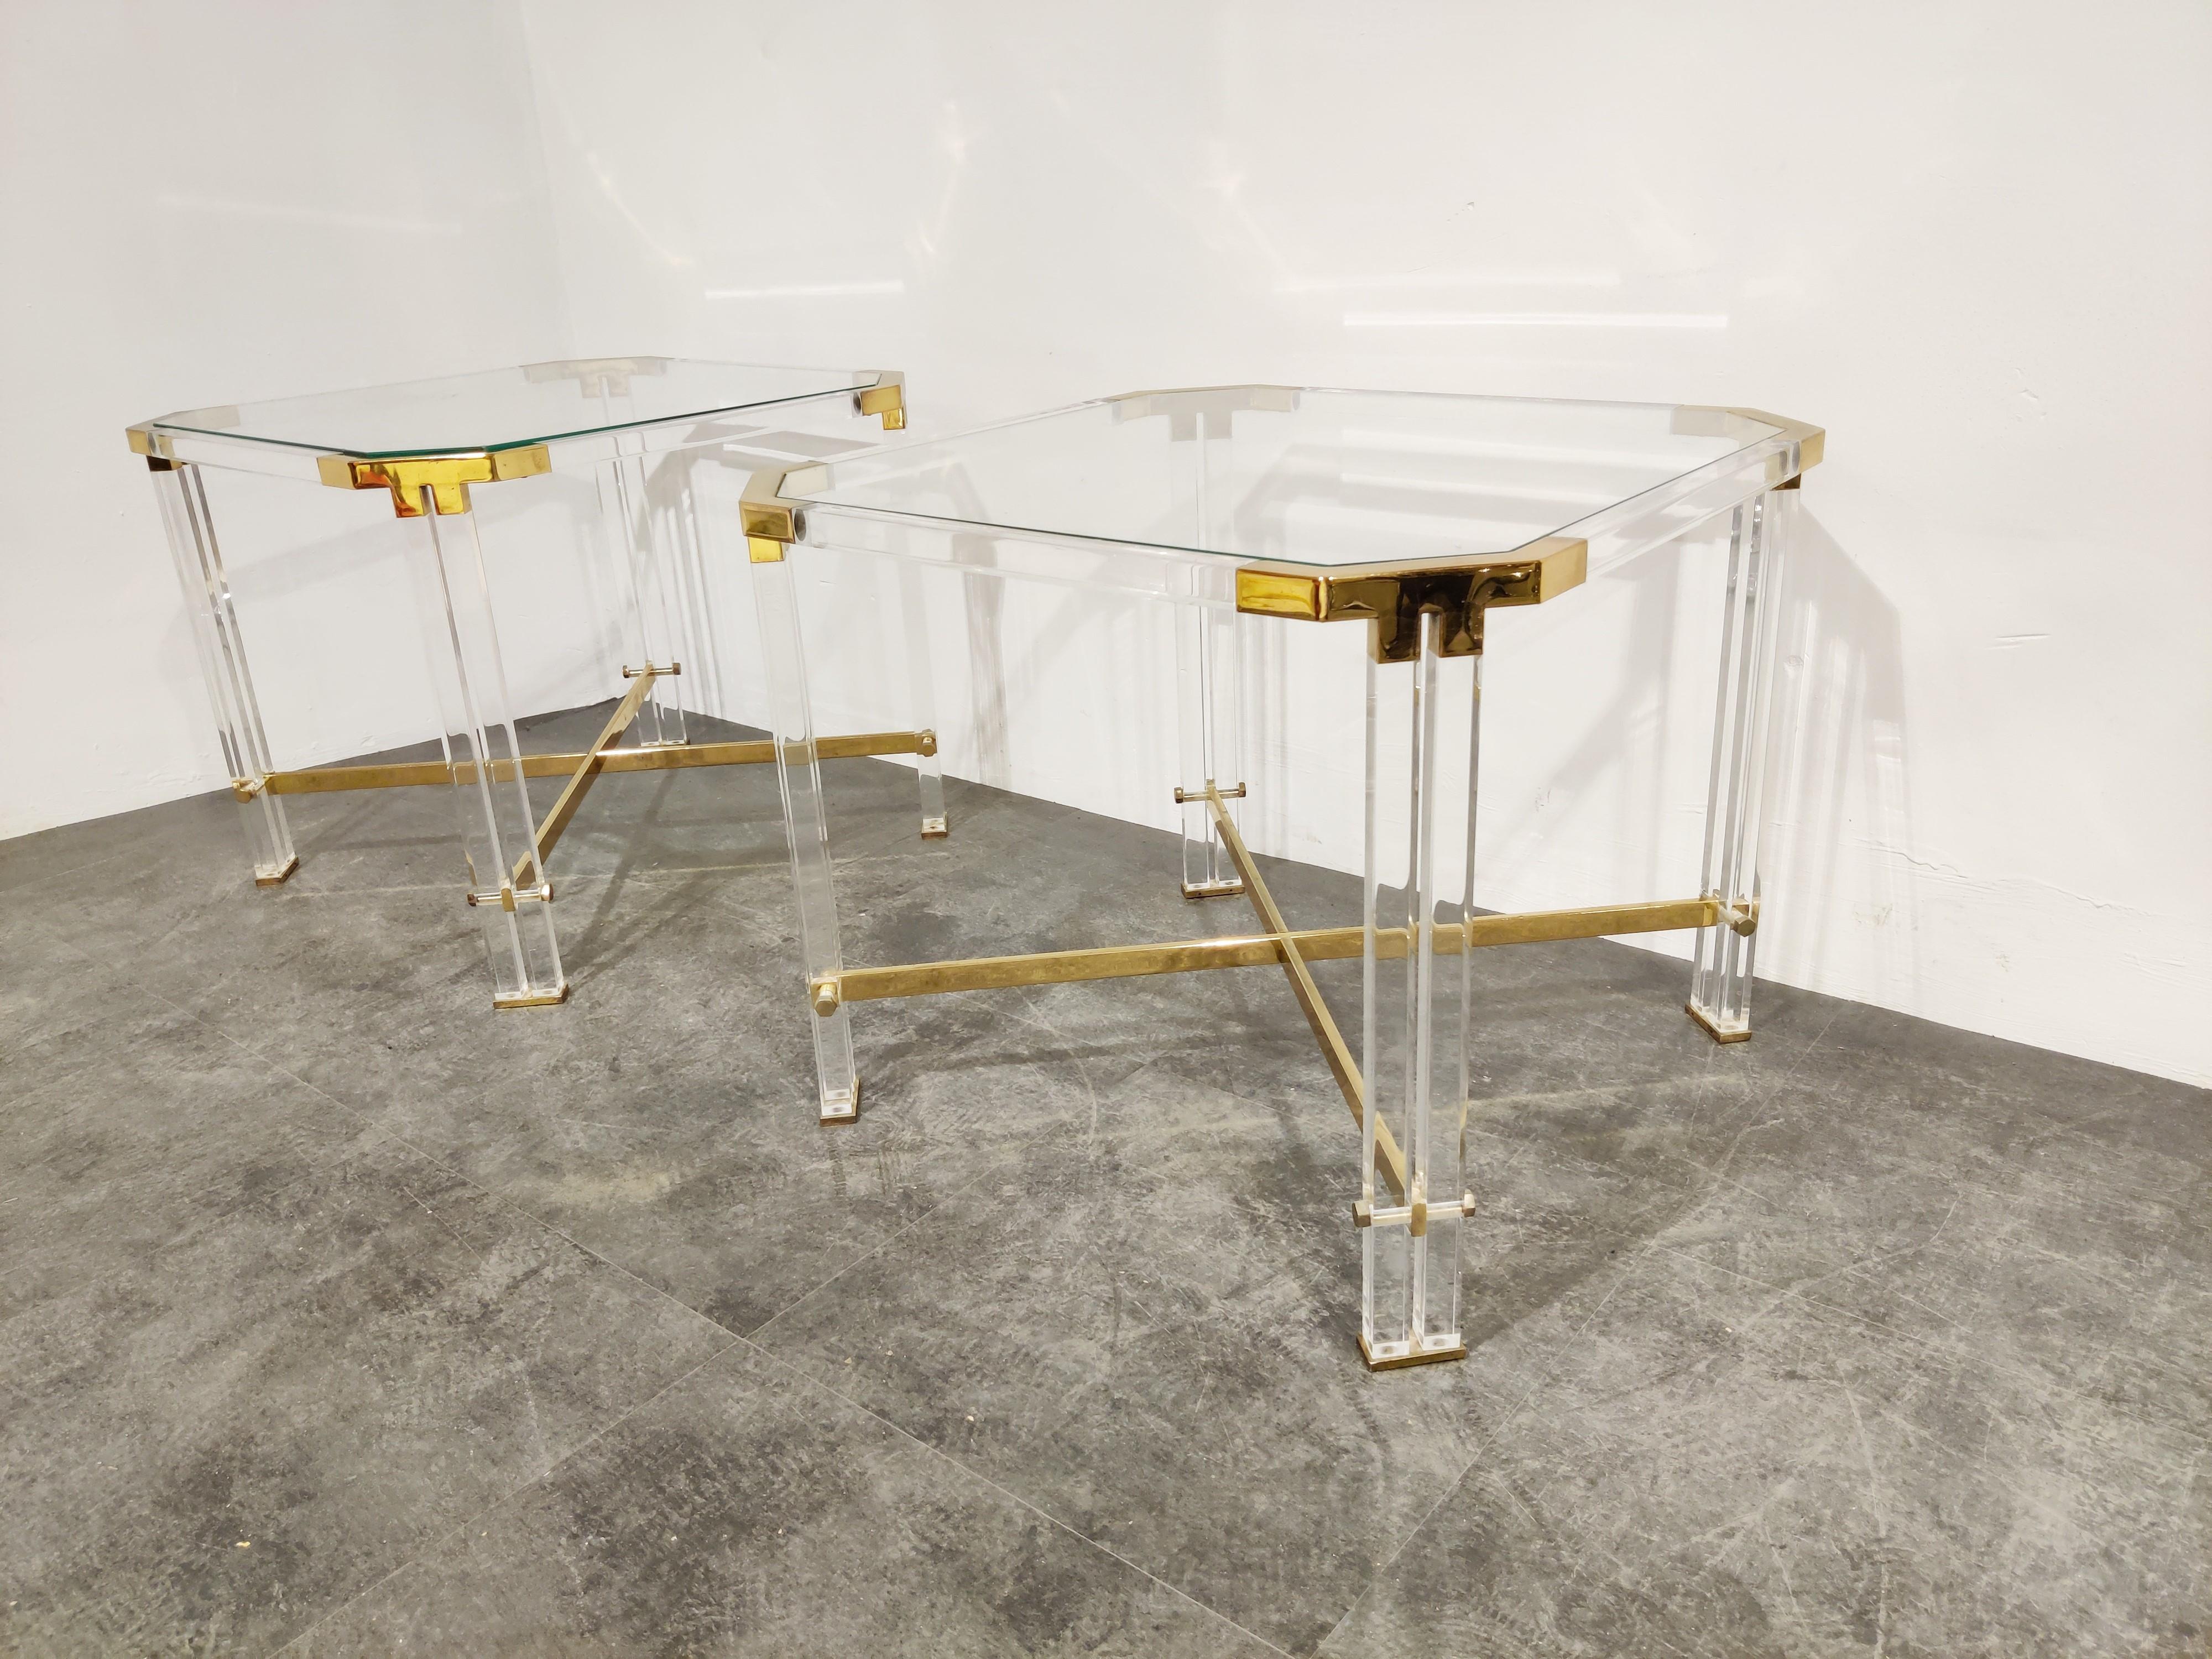 Gorgeous pair of Lucite and brass side tables with a clear glass top by Charles Hollis Jones

Good overall condition.

One of the tables has a small chip in the corner.

1970s - Belgium

Dimensions:

Height 52cm/20.47